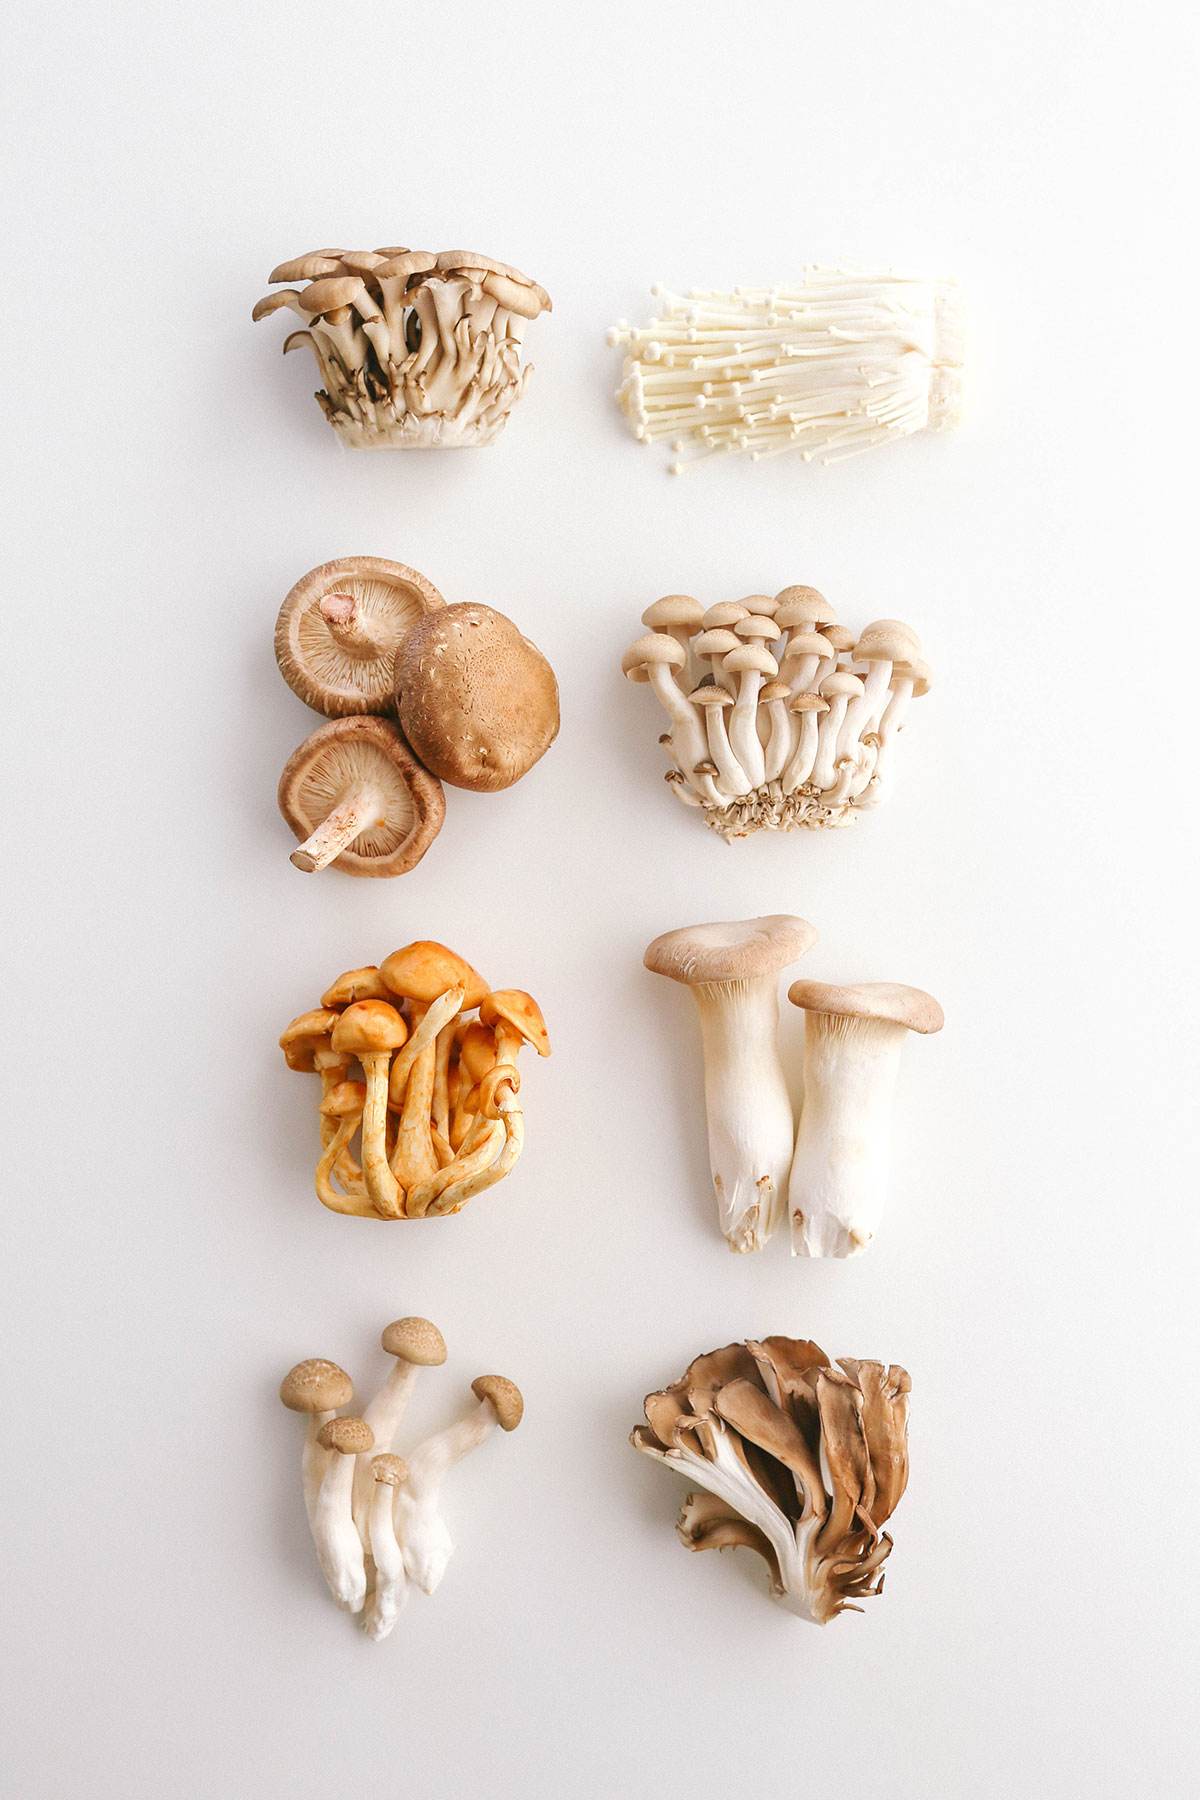 Japanese mushroom types and keto or low carb.